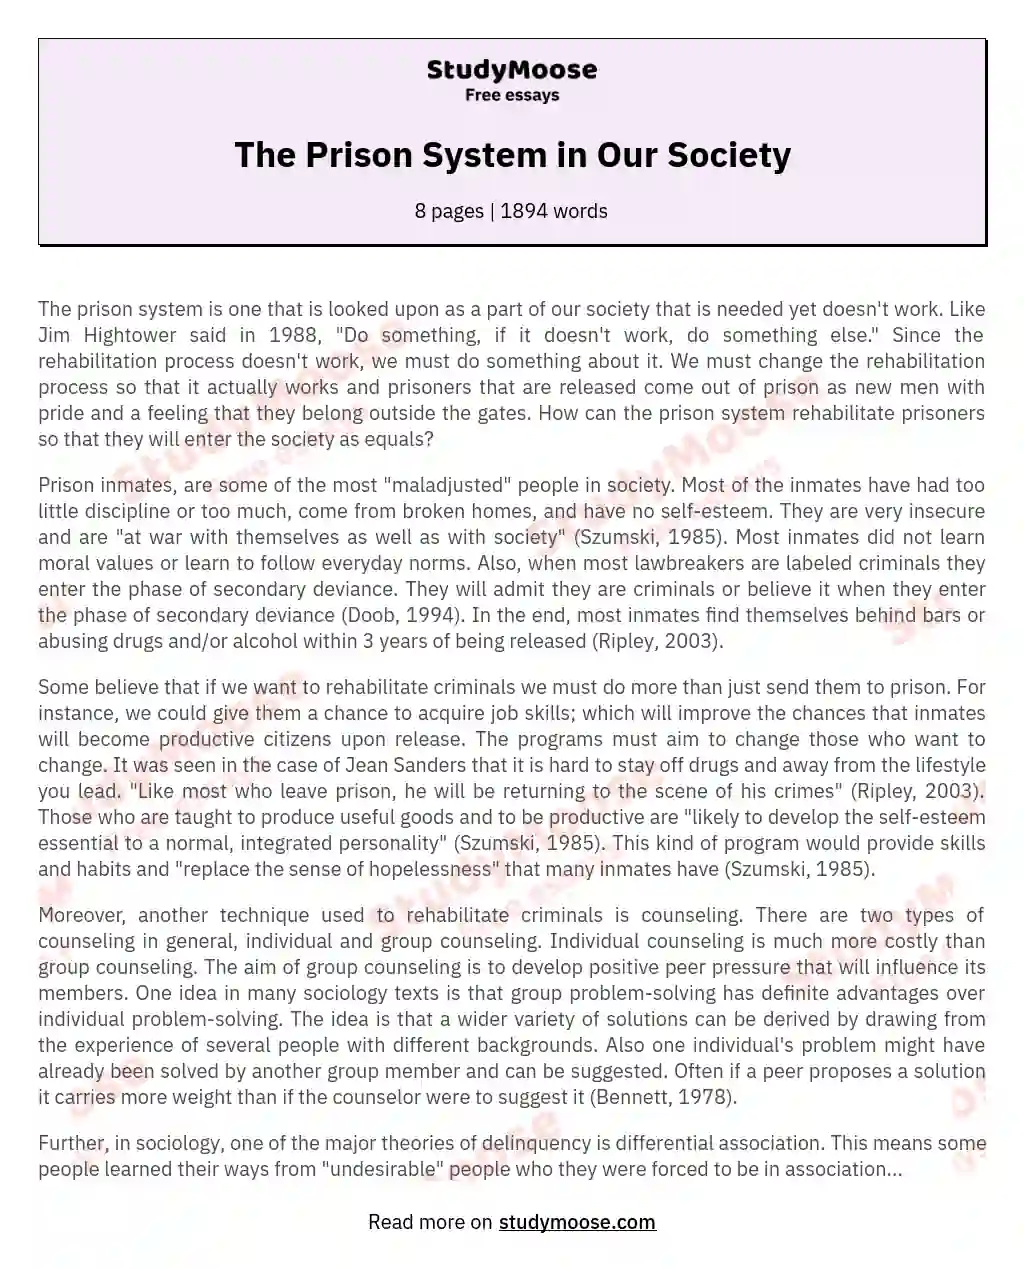 The Prison System in Our Society essay